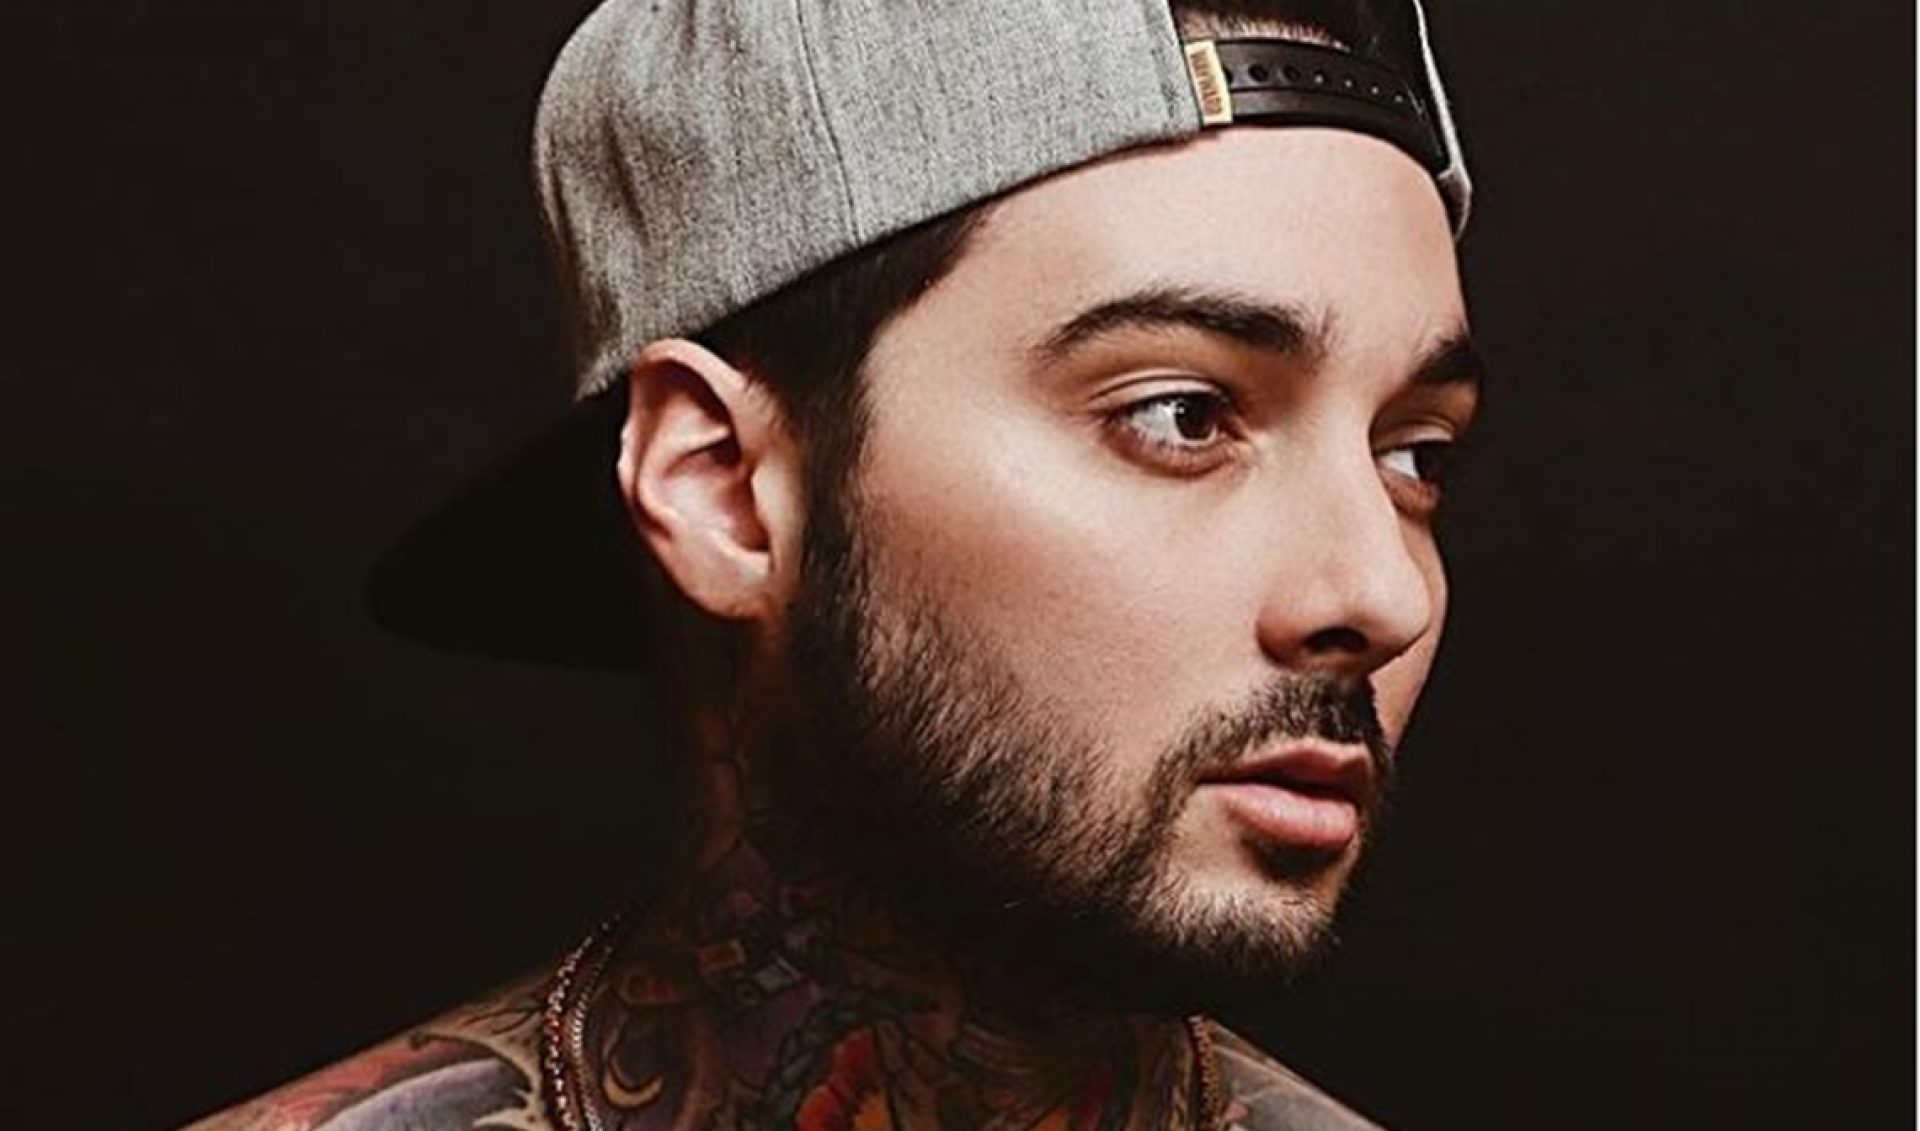 Tattooist Romeo Inappropriate Messages To Young Fans: "Some Real, And Some Are Fabricated" - Tubefilter